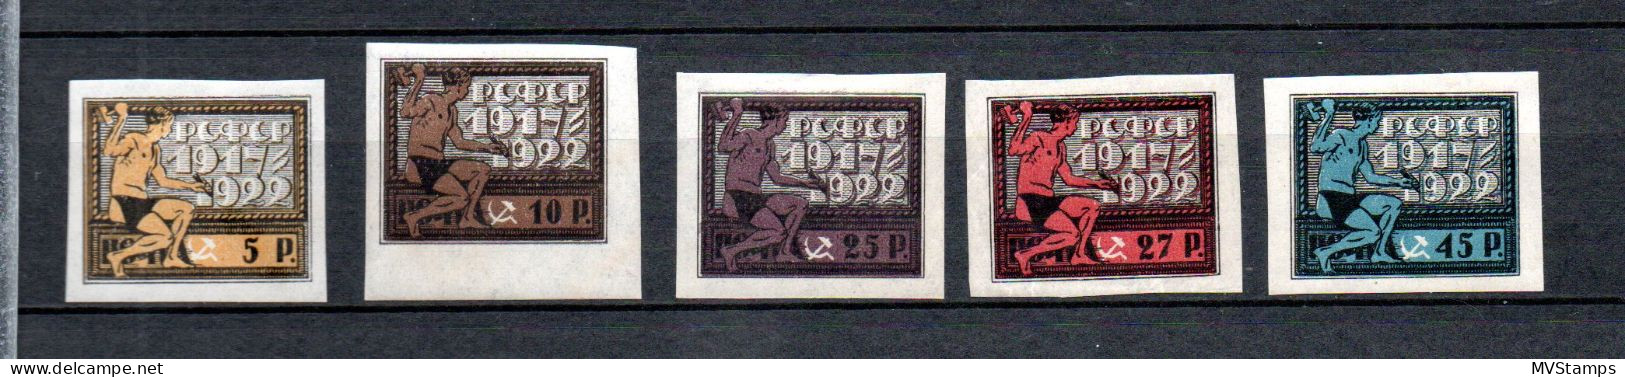 Russia 1922 Old Set October-Revolution Stamps (Michel 195/99) Nice MLH - Unused Stamps